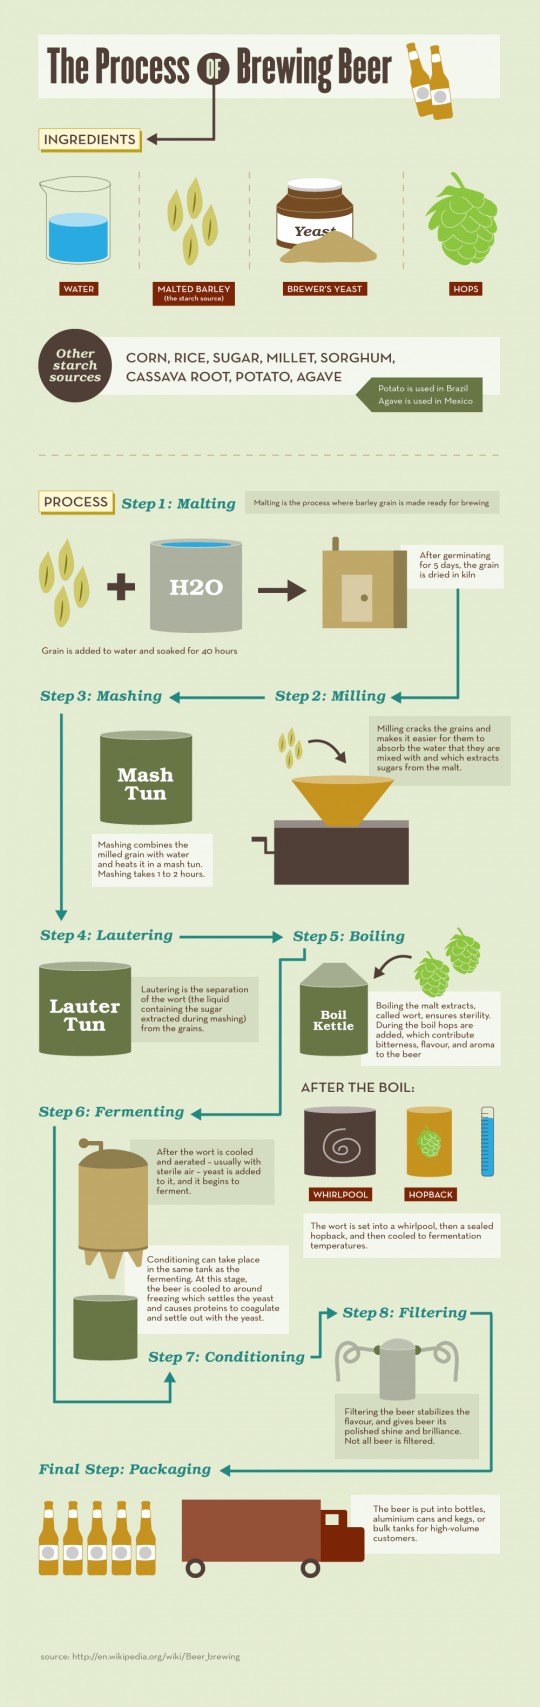 The Process of Brewing Beer